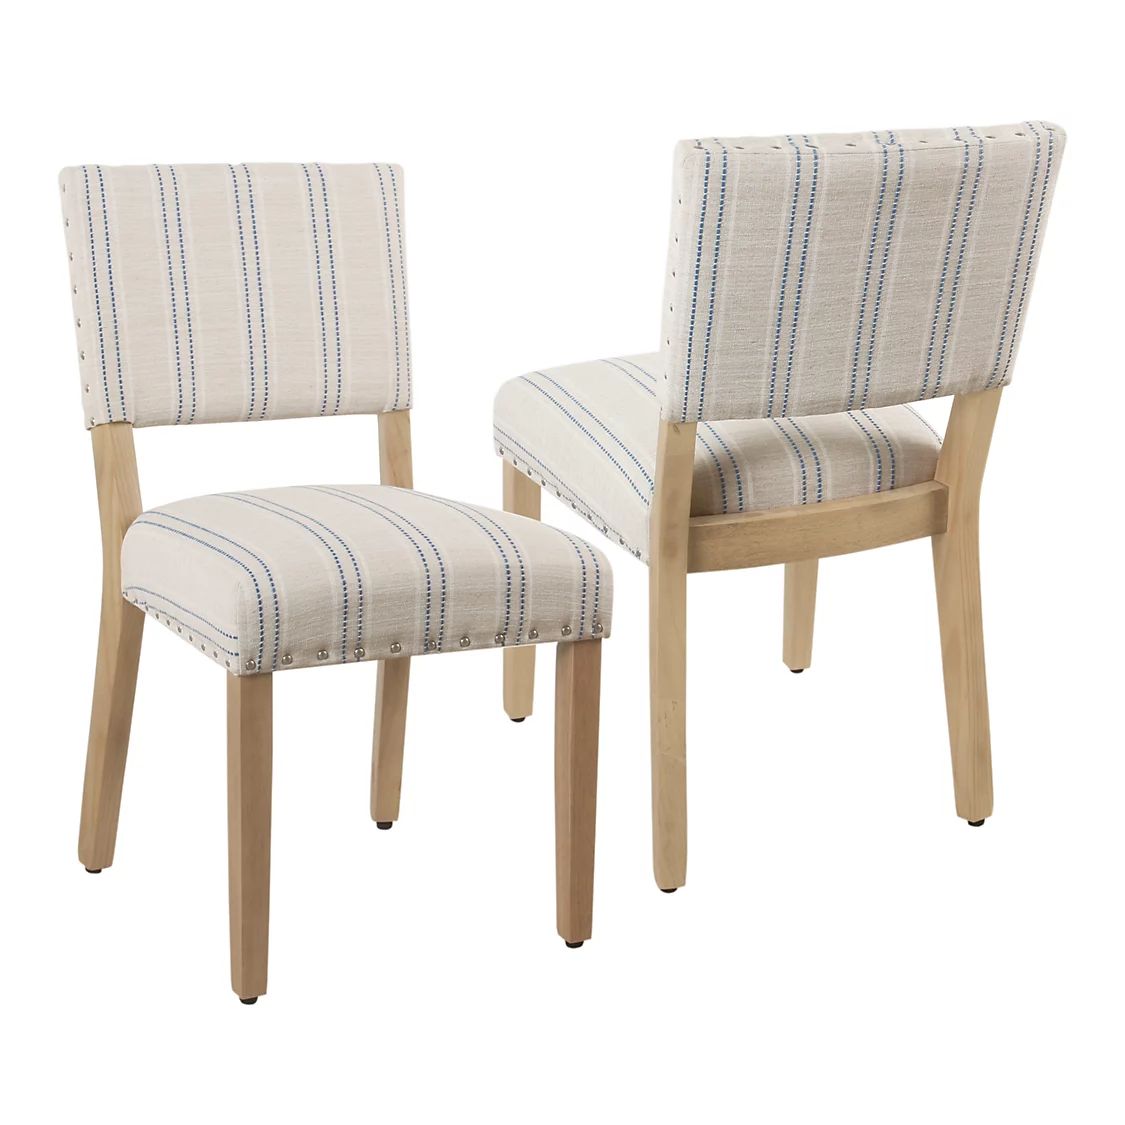 HomePop Striped Dining Chair 2-piece set | Kohl's